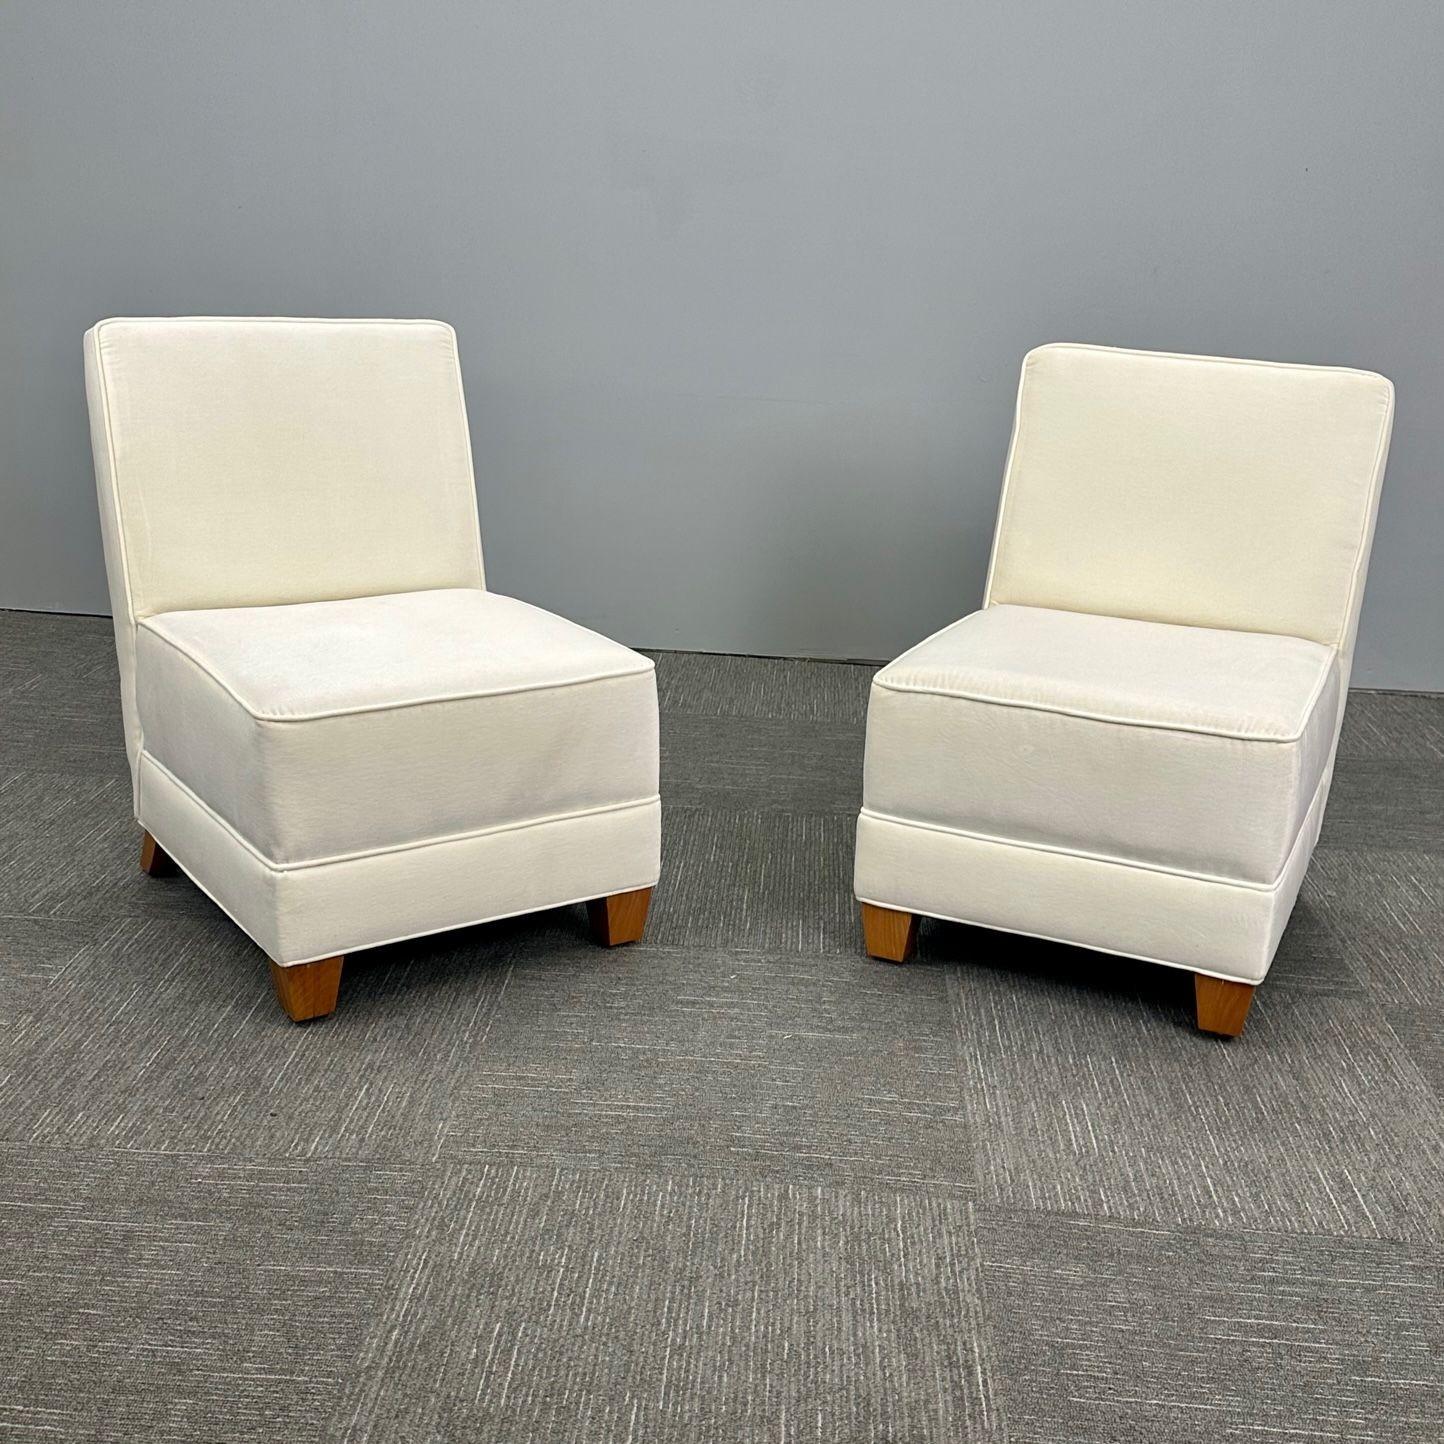 Pair Mid-Century Modern Jean-Michel Frank Style Lounge / Slipper Chairs, Mohair
 
A Custom pair of White Mohair, Stained Oak side chairs after a copy by Jean Michel Frank. The pair having new mohair upholstery on bracket birch feet. Handmade in